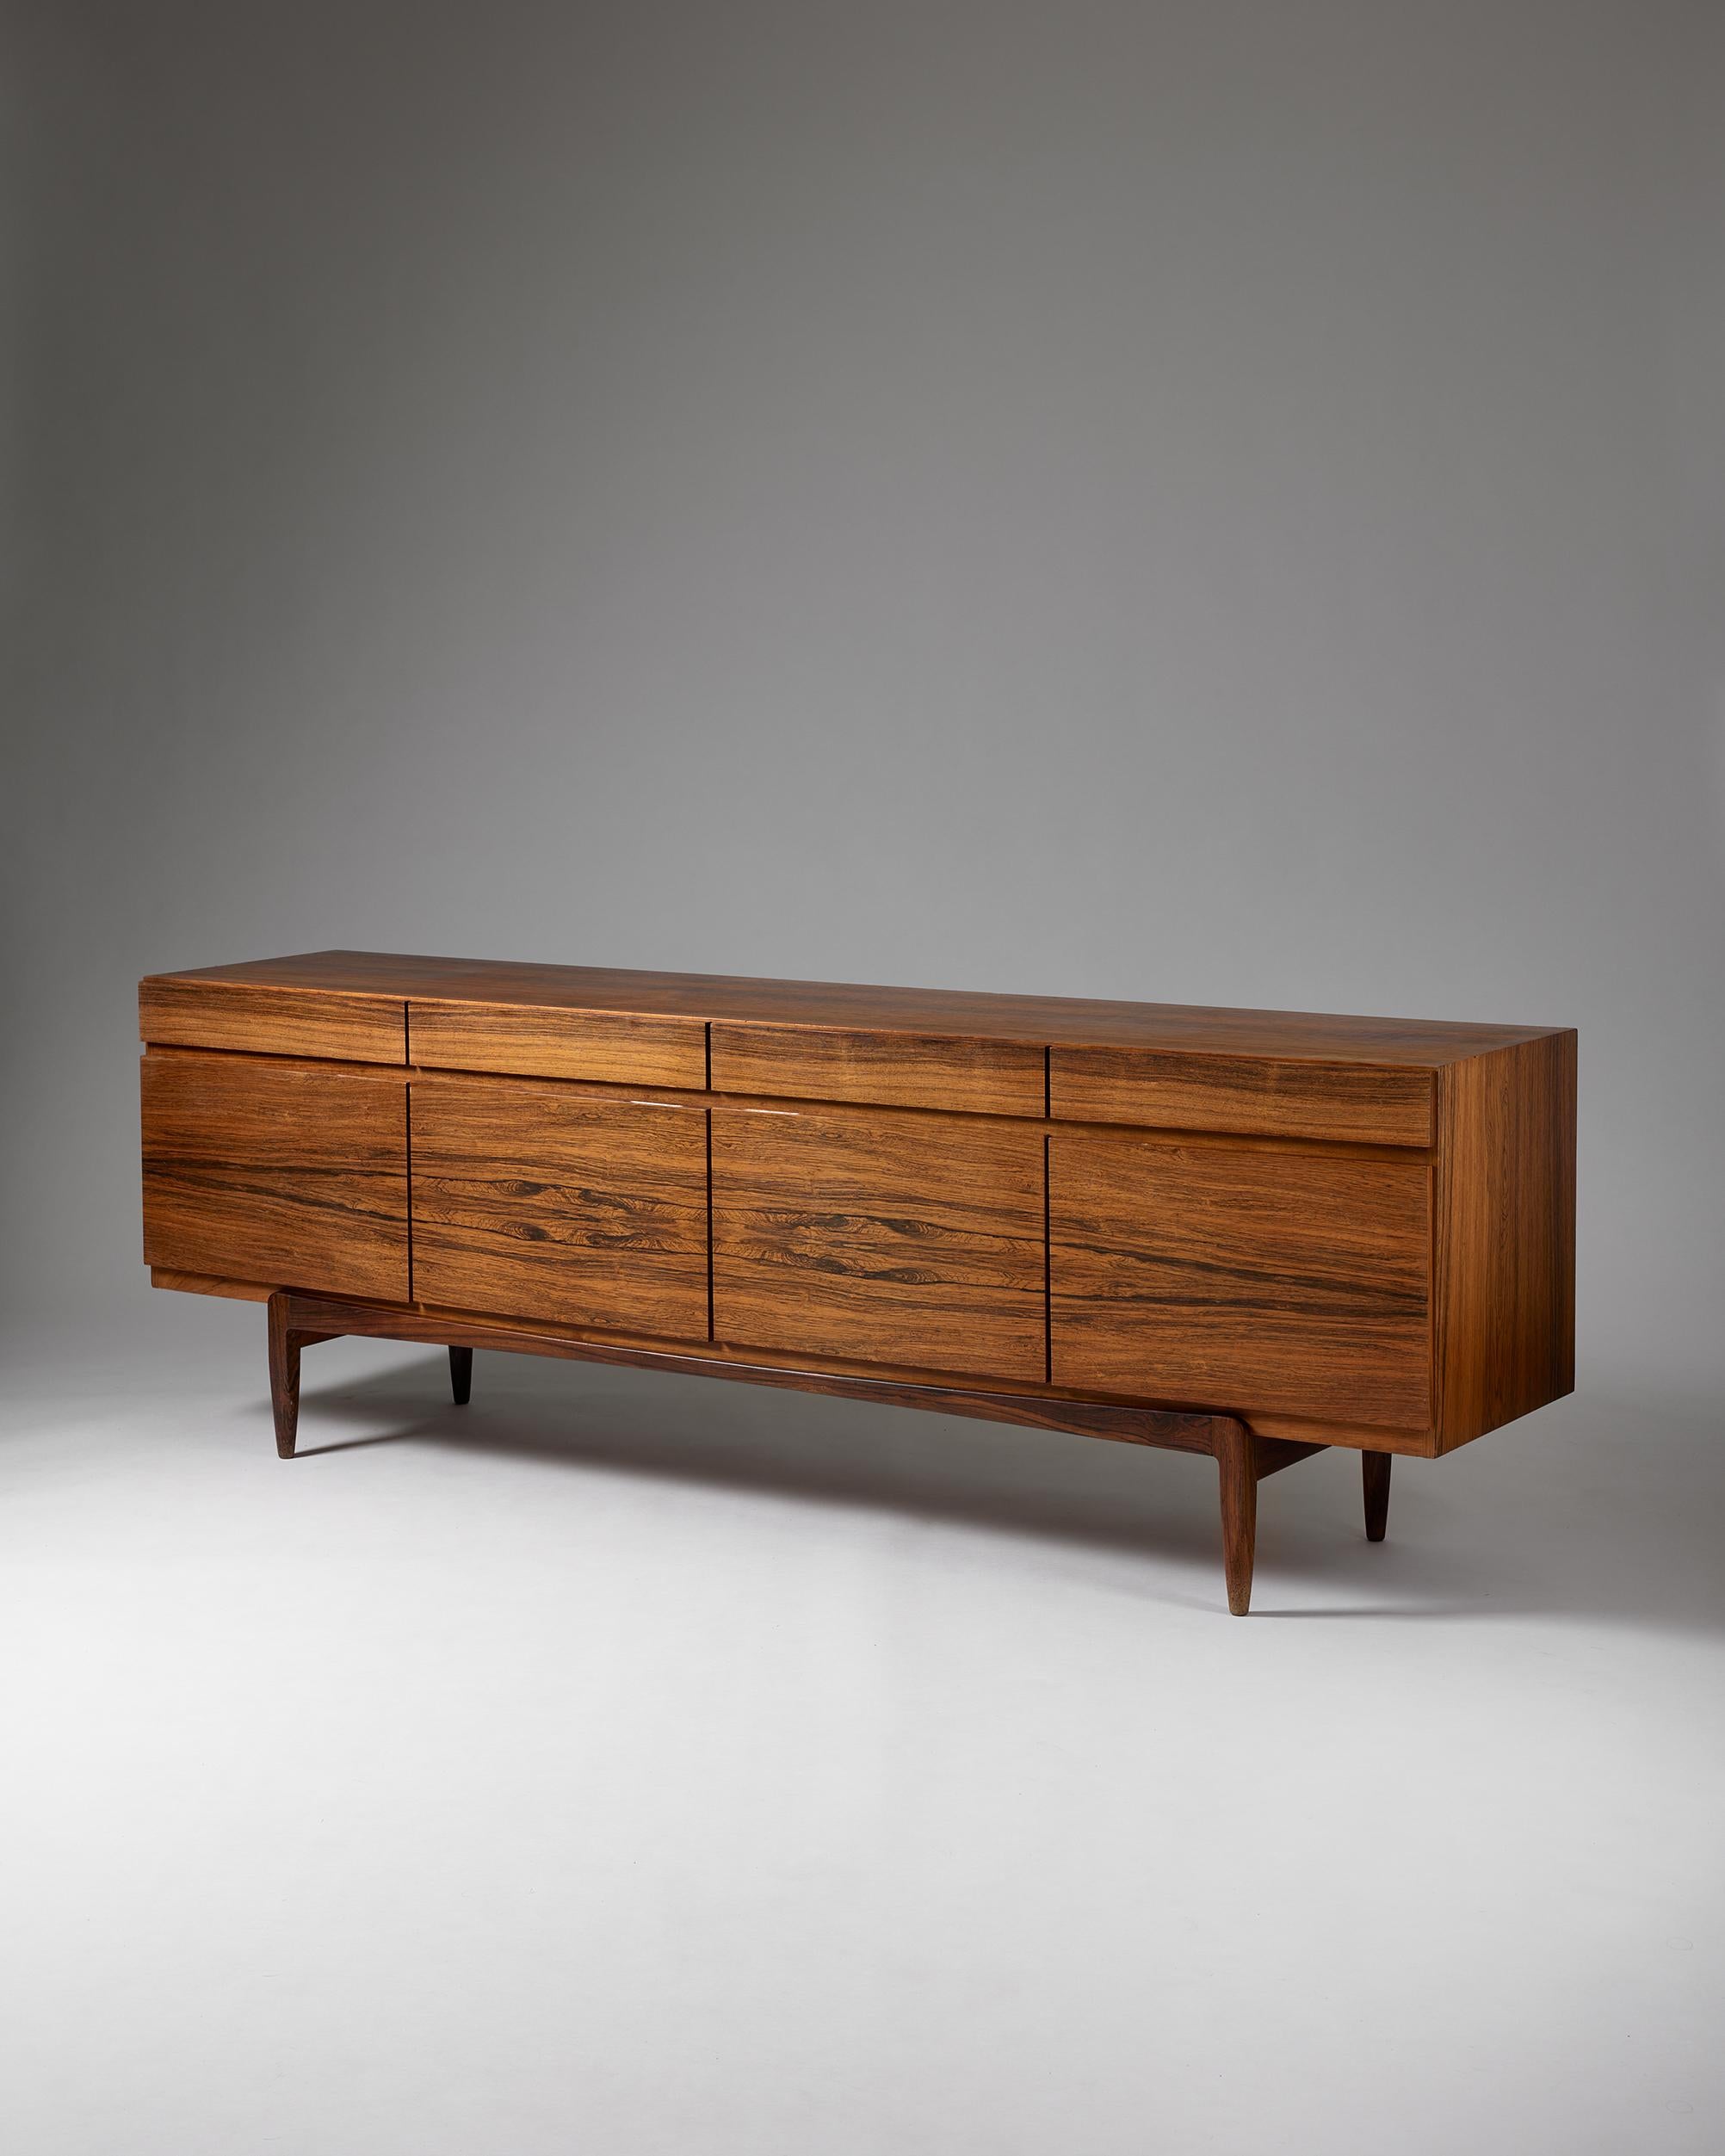 Sideboard model FA 66 designed by Ib Kofod-Larsen for Faarup Möbelfabrik,
Denmark, 1960s.

Rosewood.

The clean lines of Ib Kofod-Larsen’s model FA 66 in rosewood make it a notable Scandinavian mid-century collectable. Remarkably, it appears as if